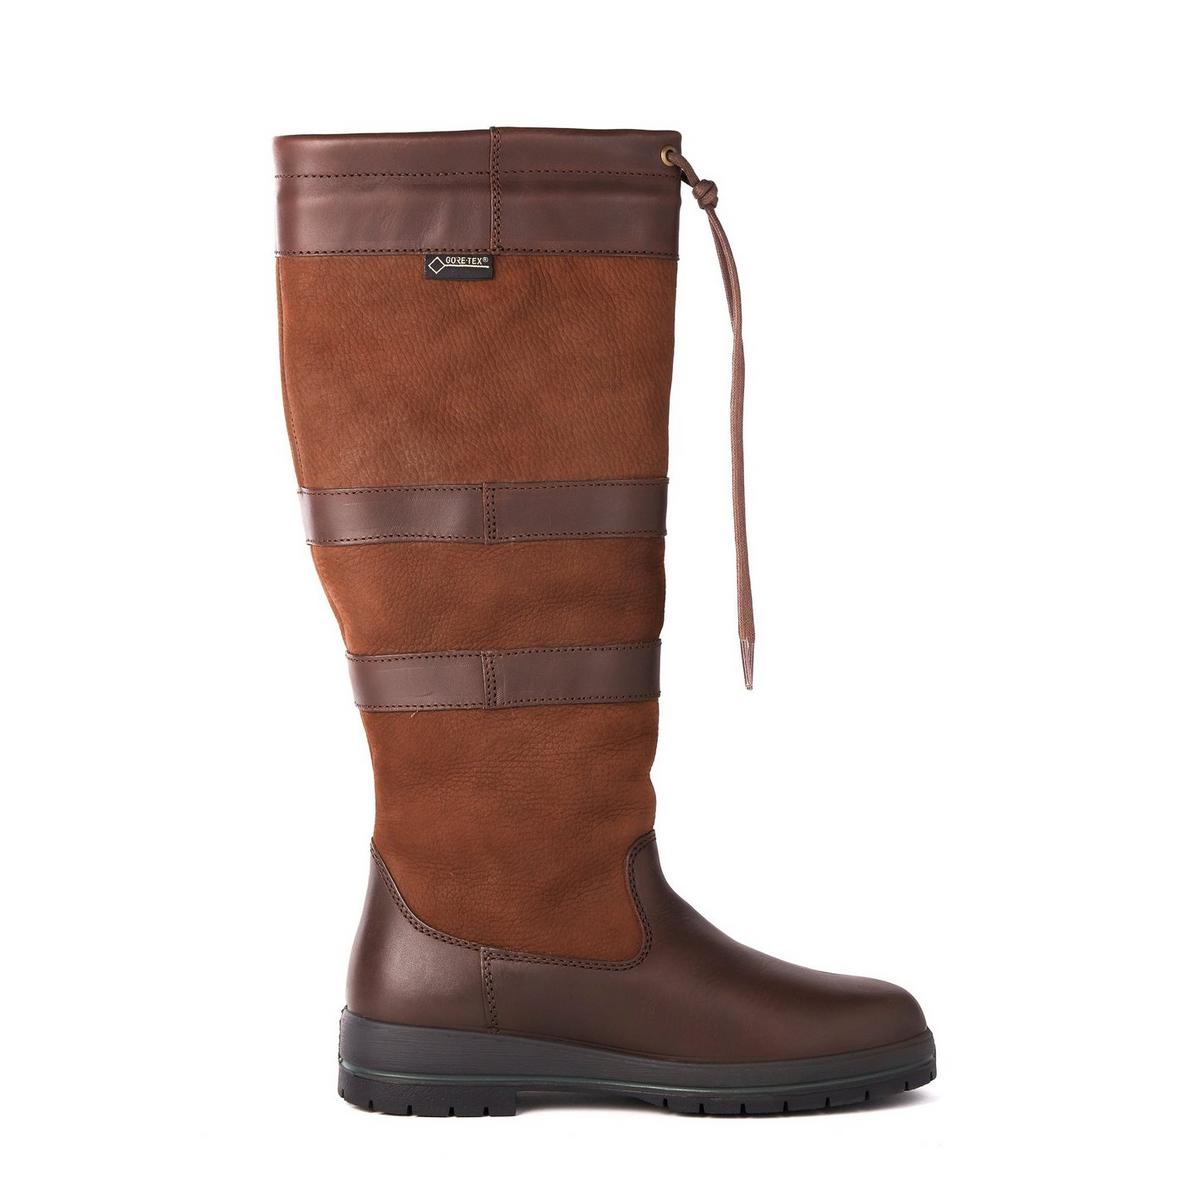 Dubarry Women's Galway Country Boots